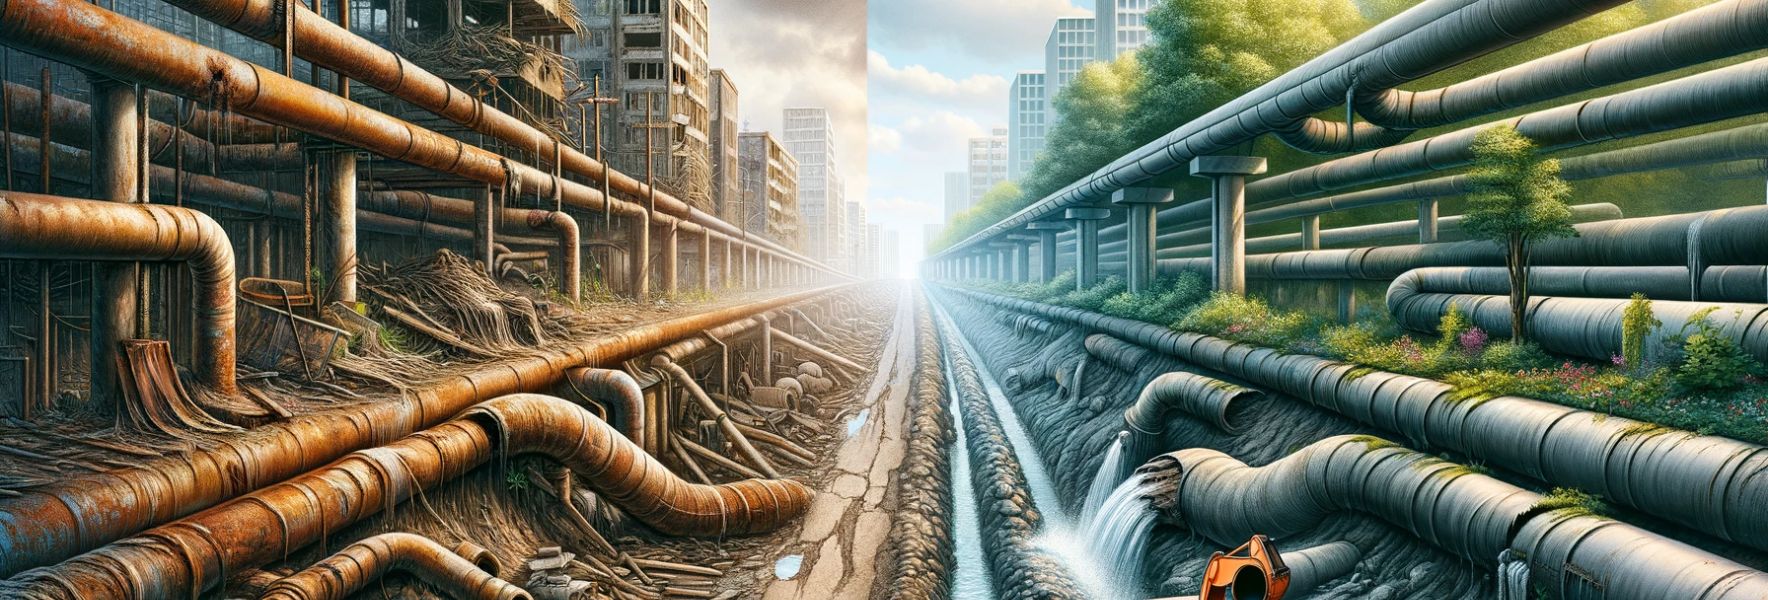 A side-by-side comparison of aging infrastructure versus improved infrastructure. The left side depicts aging infrastructure with old rusty pipes and crumbling concrete, while the right side shows the improved infrastructure with new pipes and smooth, freshly paved roads, providing a clear visual contrast.